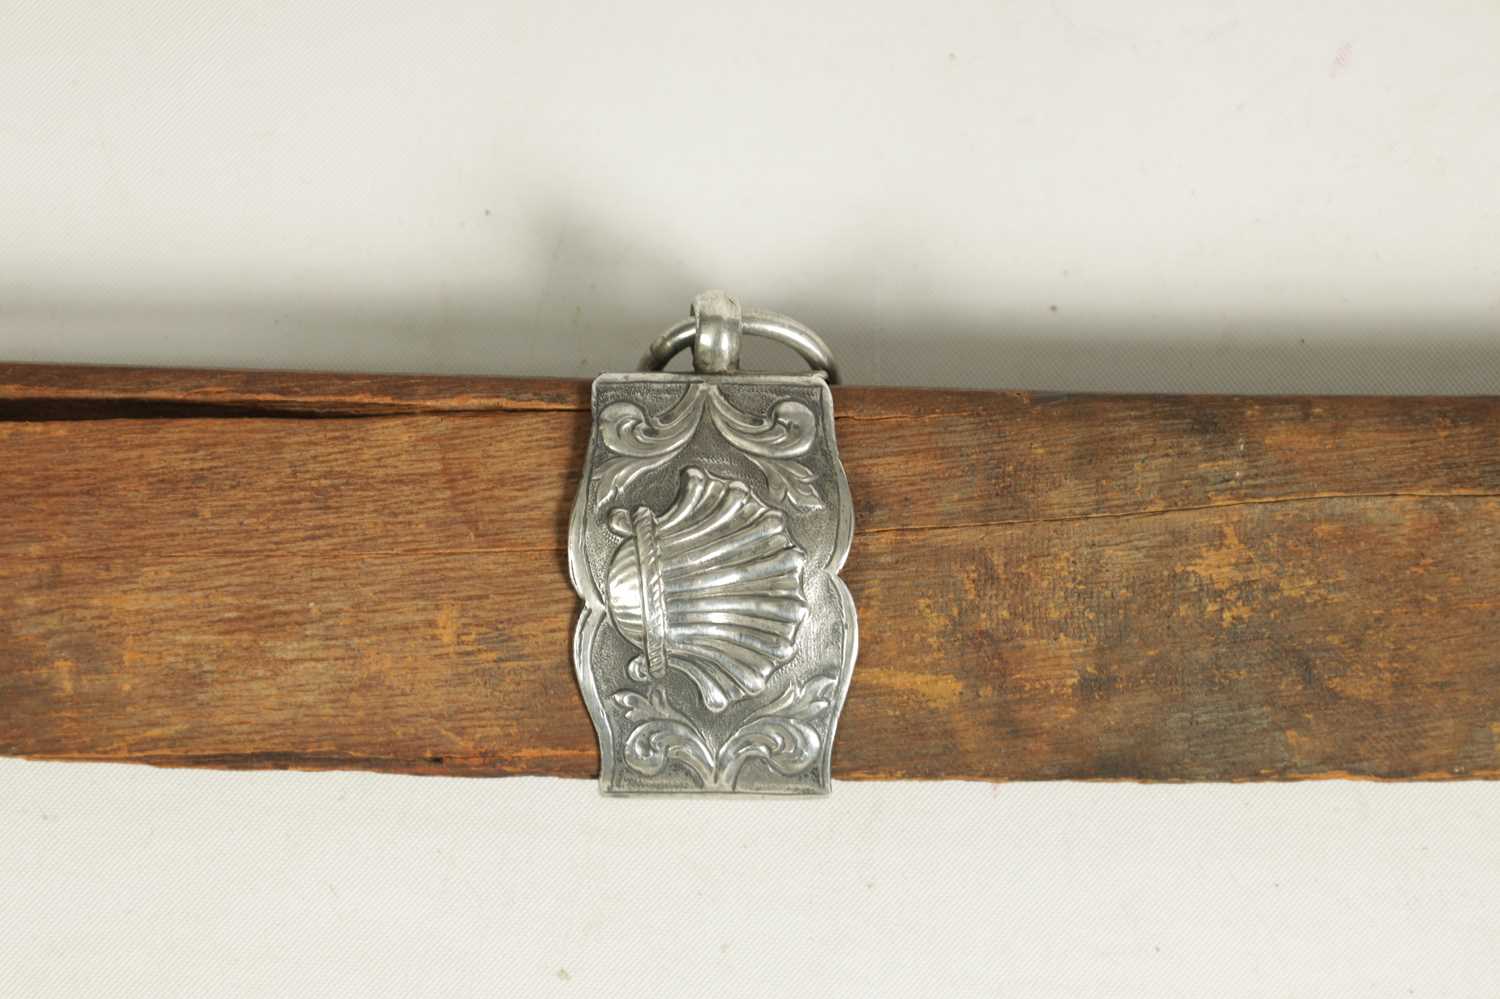 AN 18TH CENTURY ENGLISH SILVER-MOUNTED HANGER - Image 7 of 13